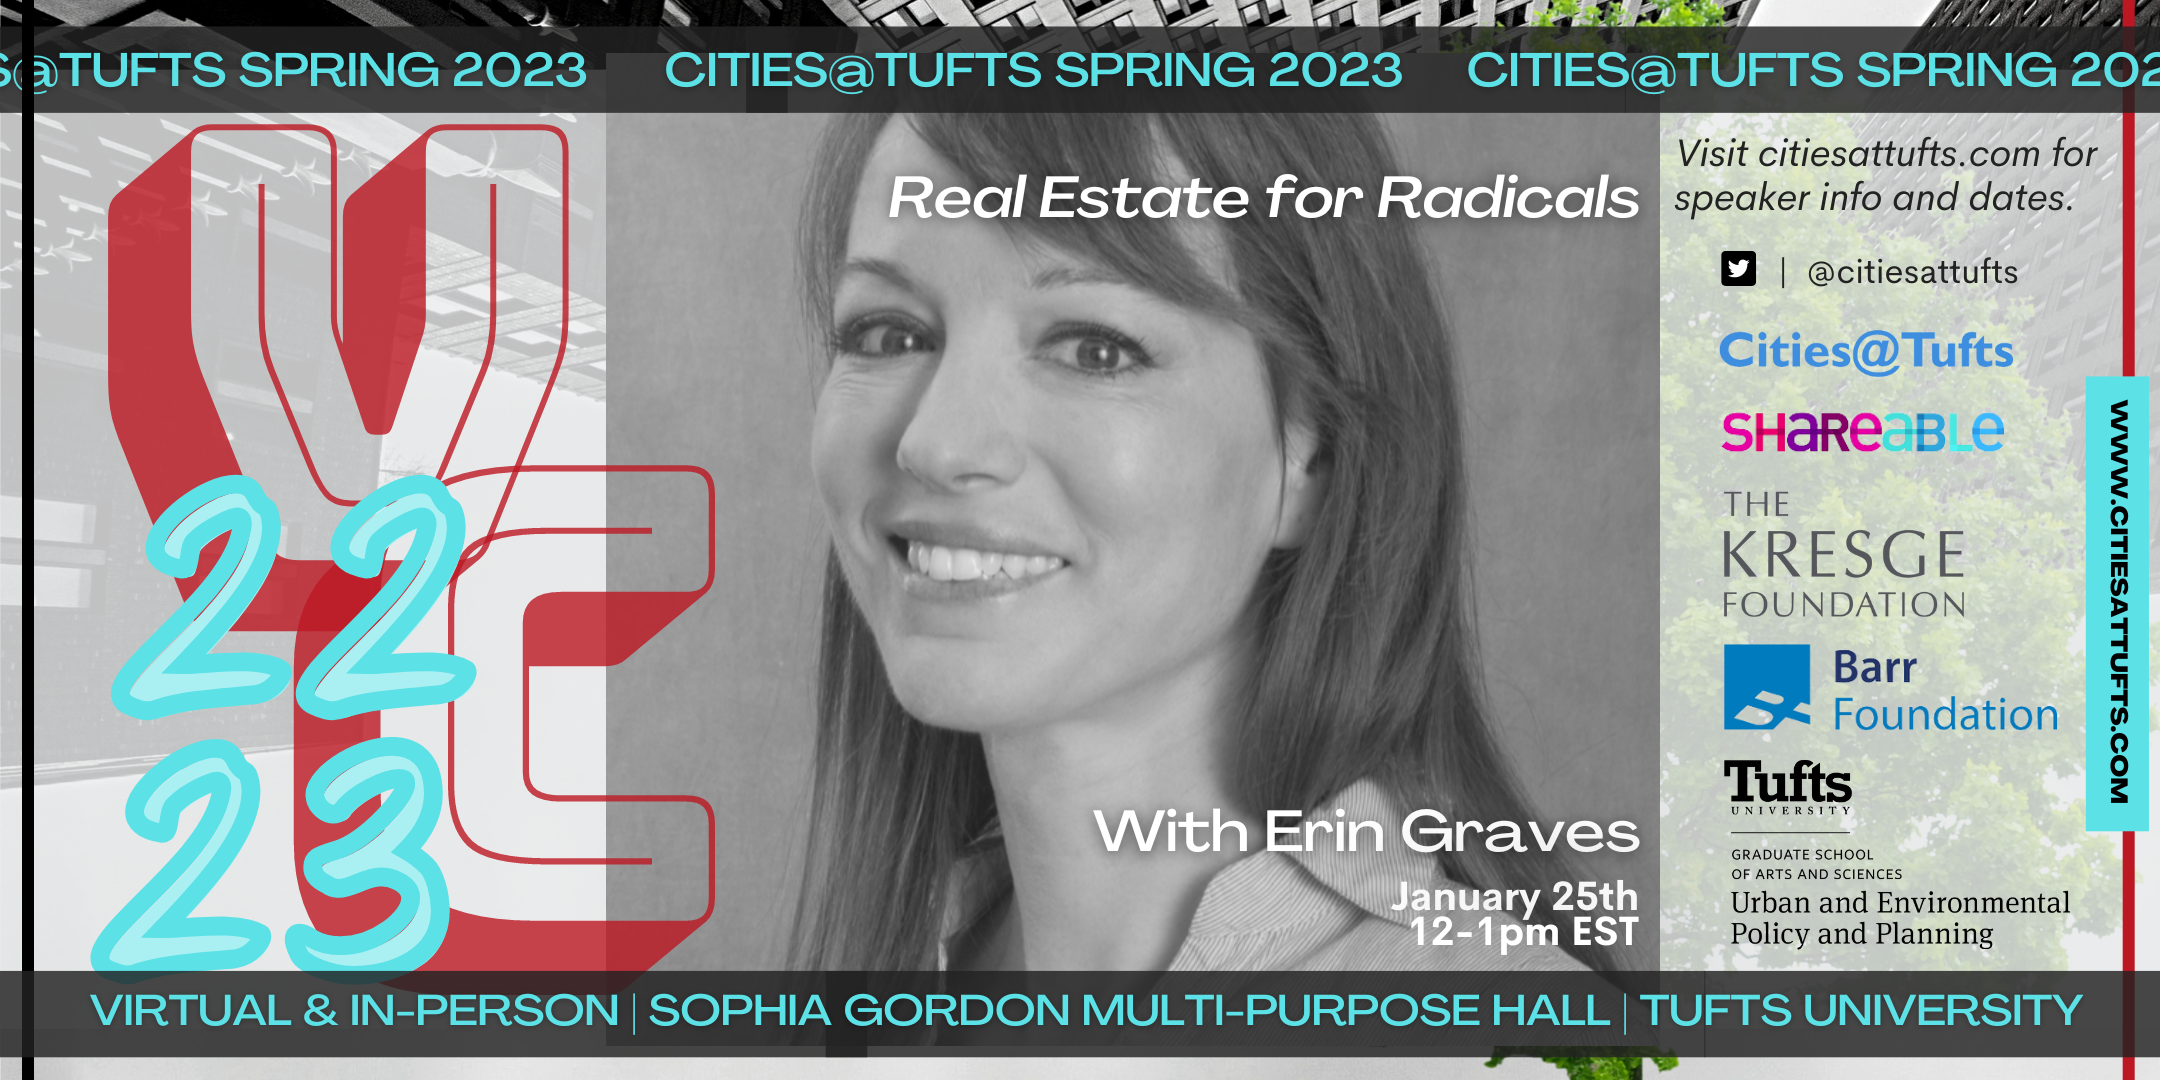 Real Estate for Radicals with Erin Graves